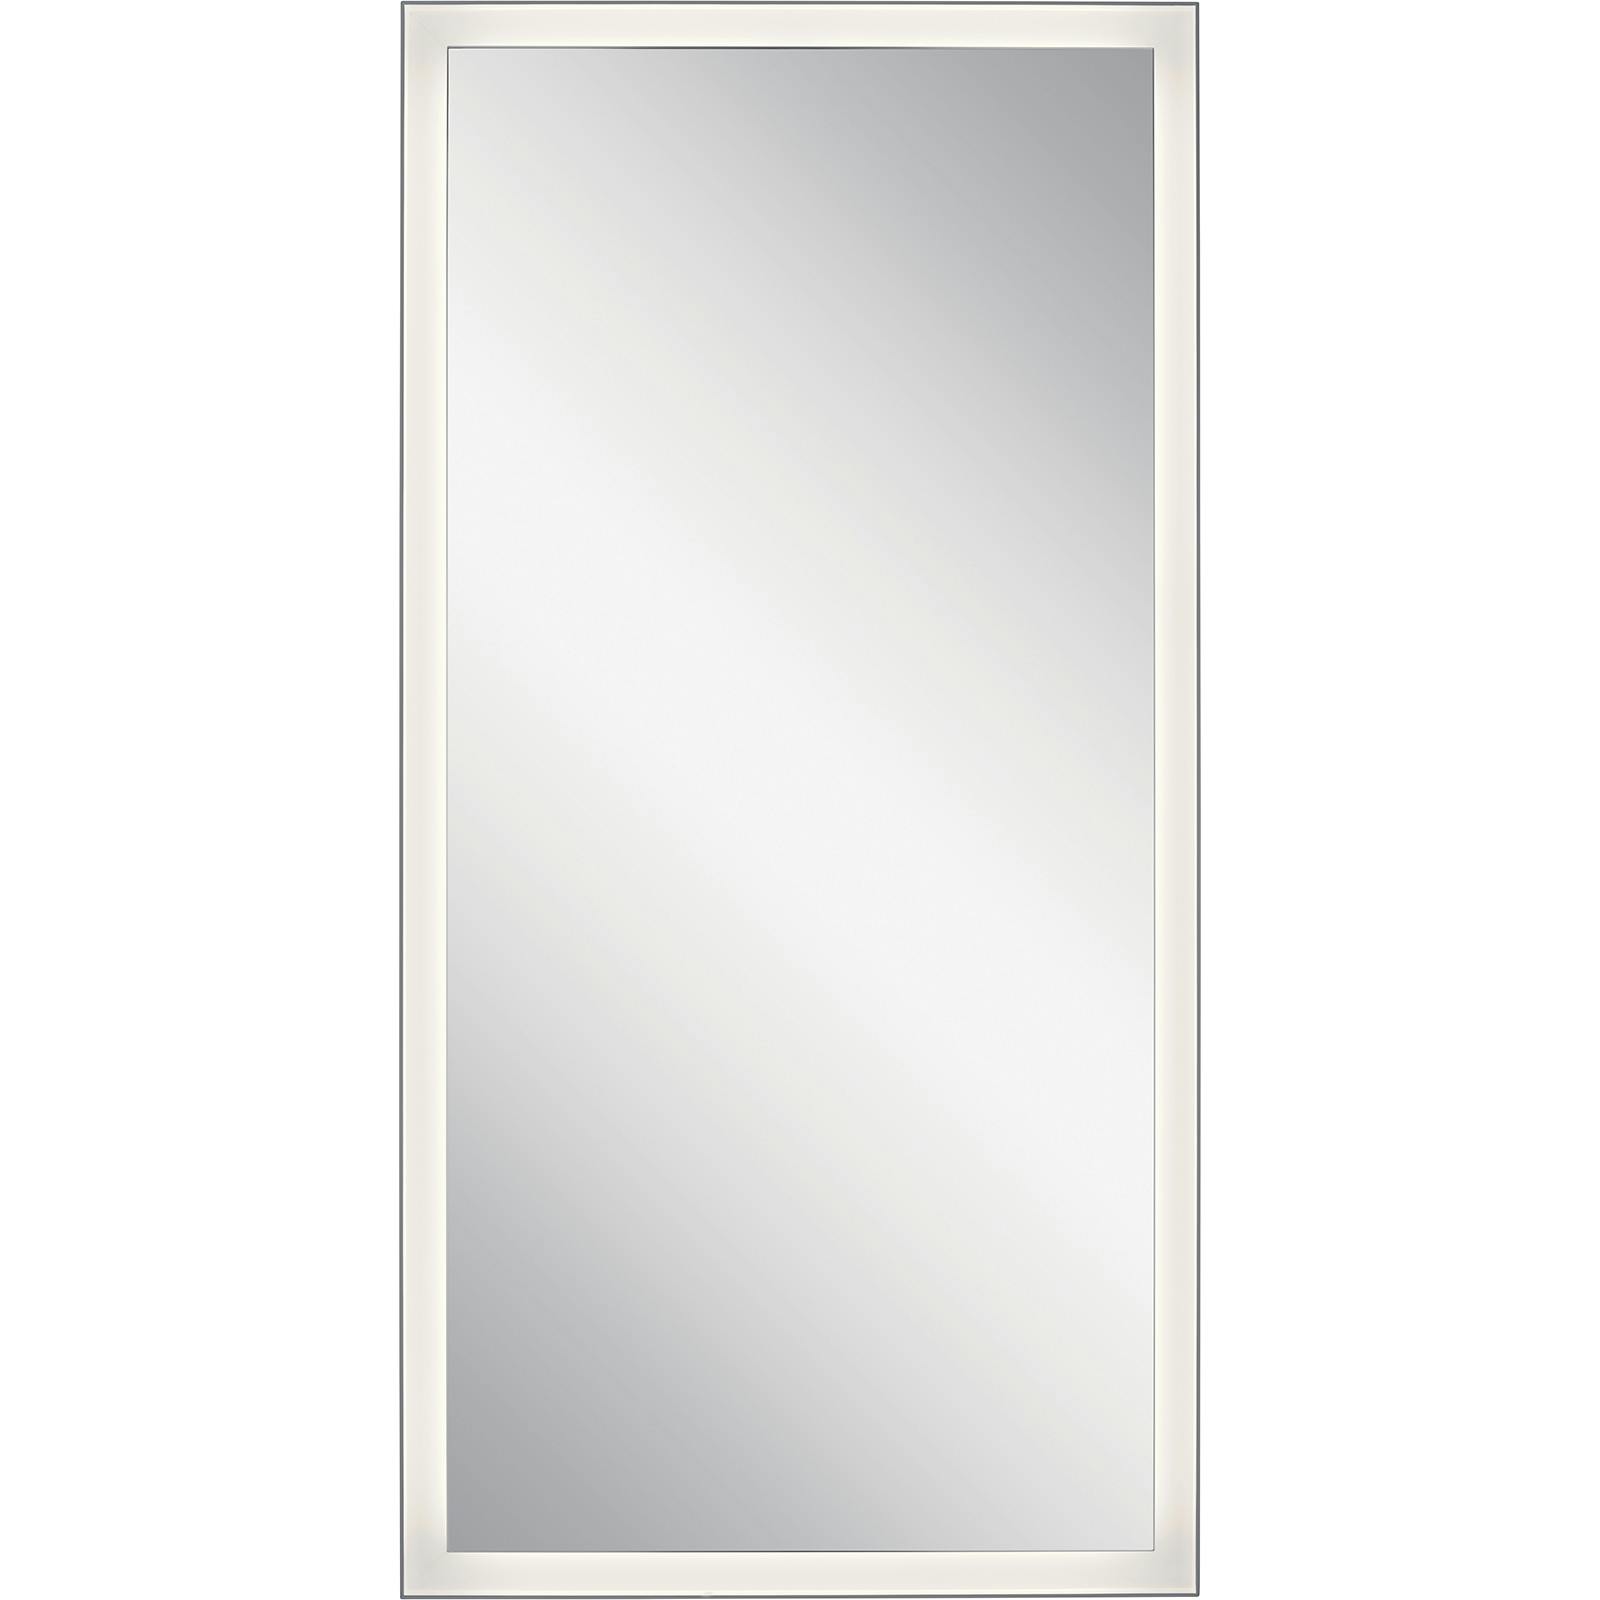 Front view of the Ryame™ 30" Lighted Mirror Silver on a white background